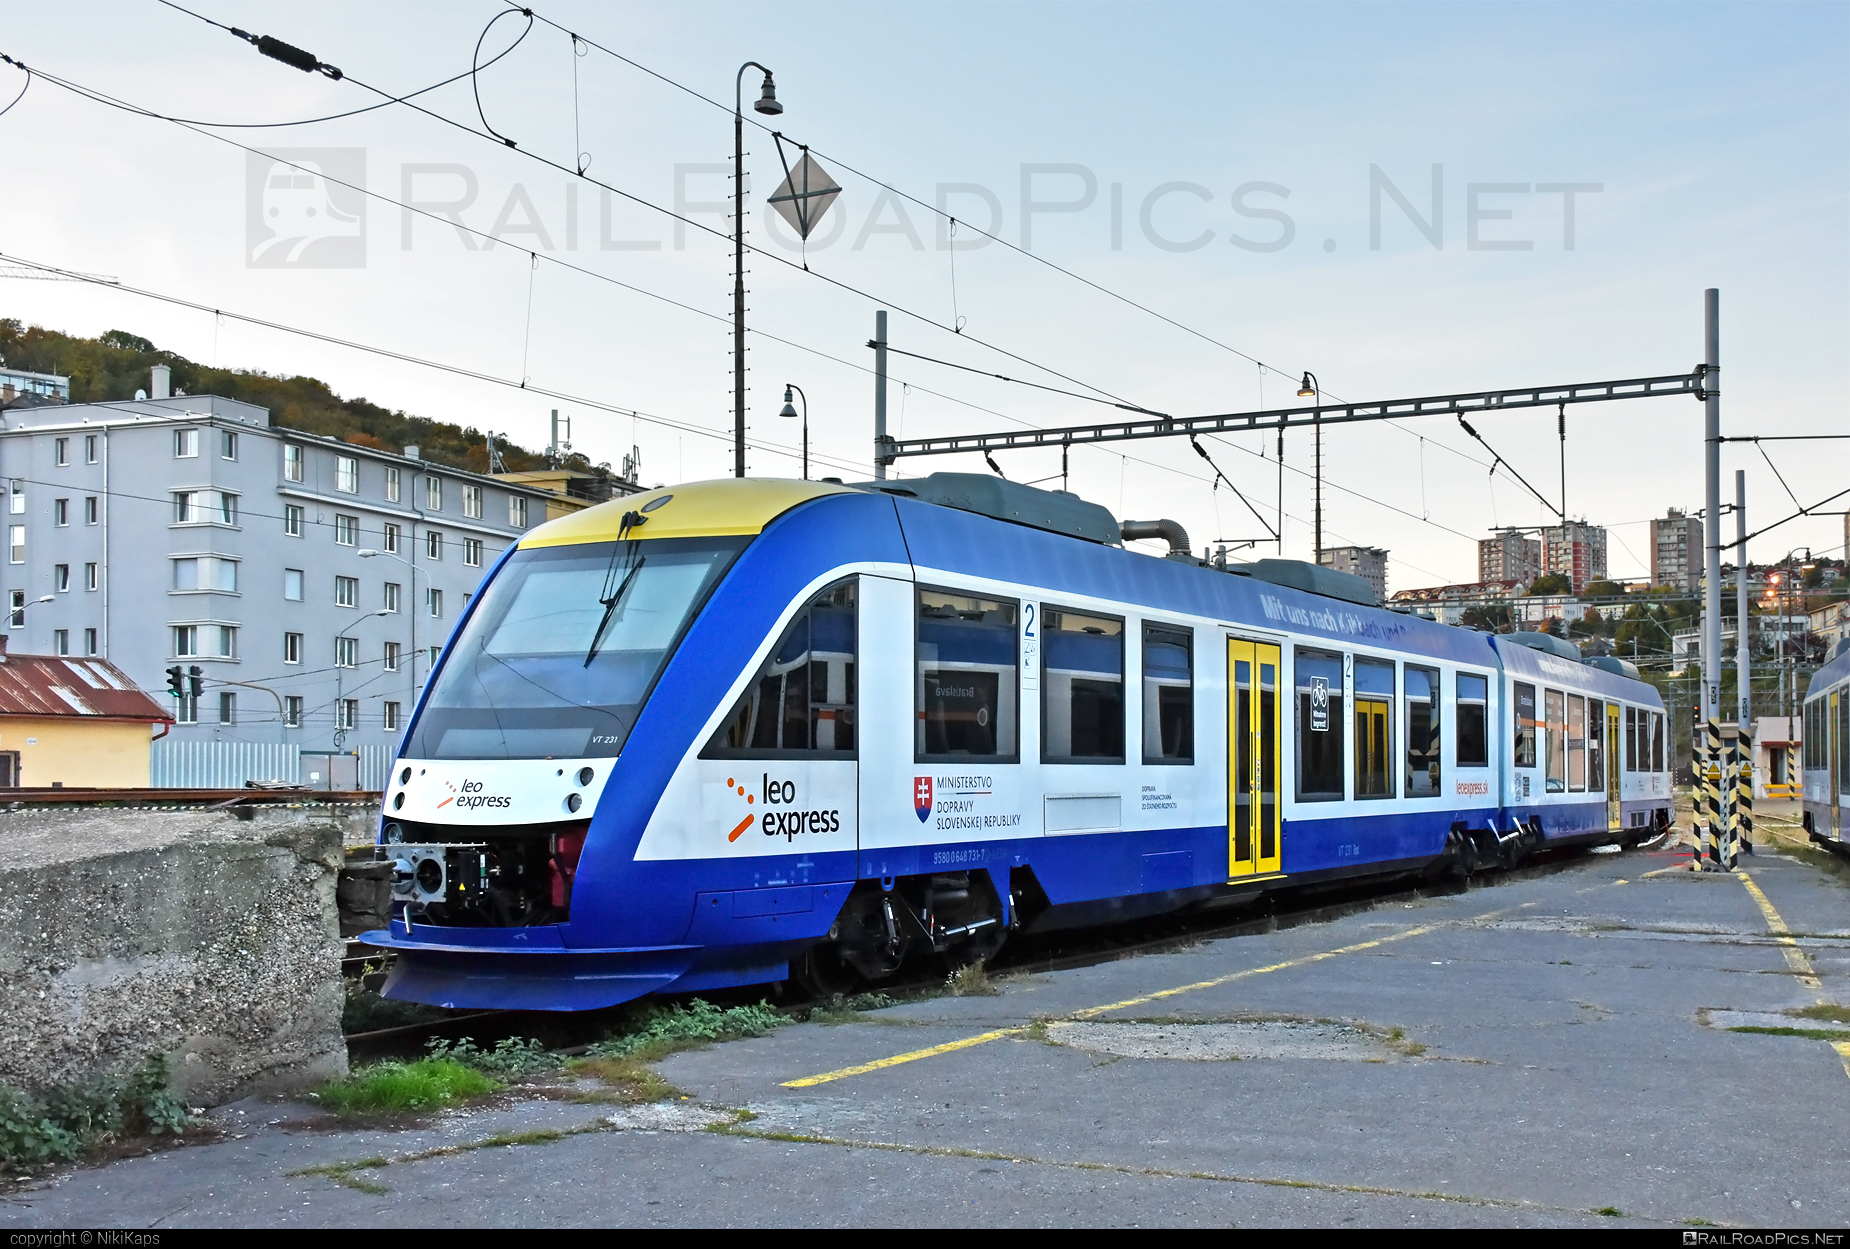 Alstom Coradia LINT 41 - VT 231 operated by LEO Express Slovensko s.r.o. #alstom #alstomCoradia #alstomCoradiaLint #alstomCoradiaLint41 #coradiaLint41 #leoExpress #leoExpressSlovensko #leoExpressSlovenskoSro